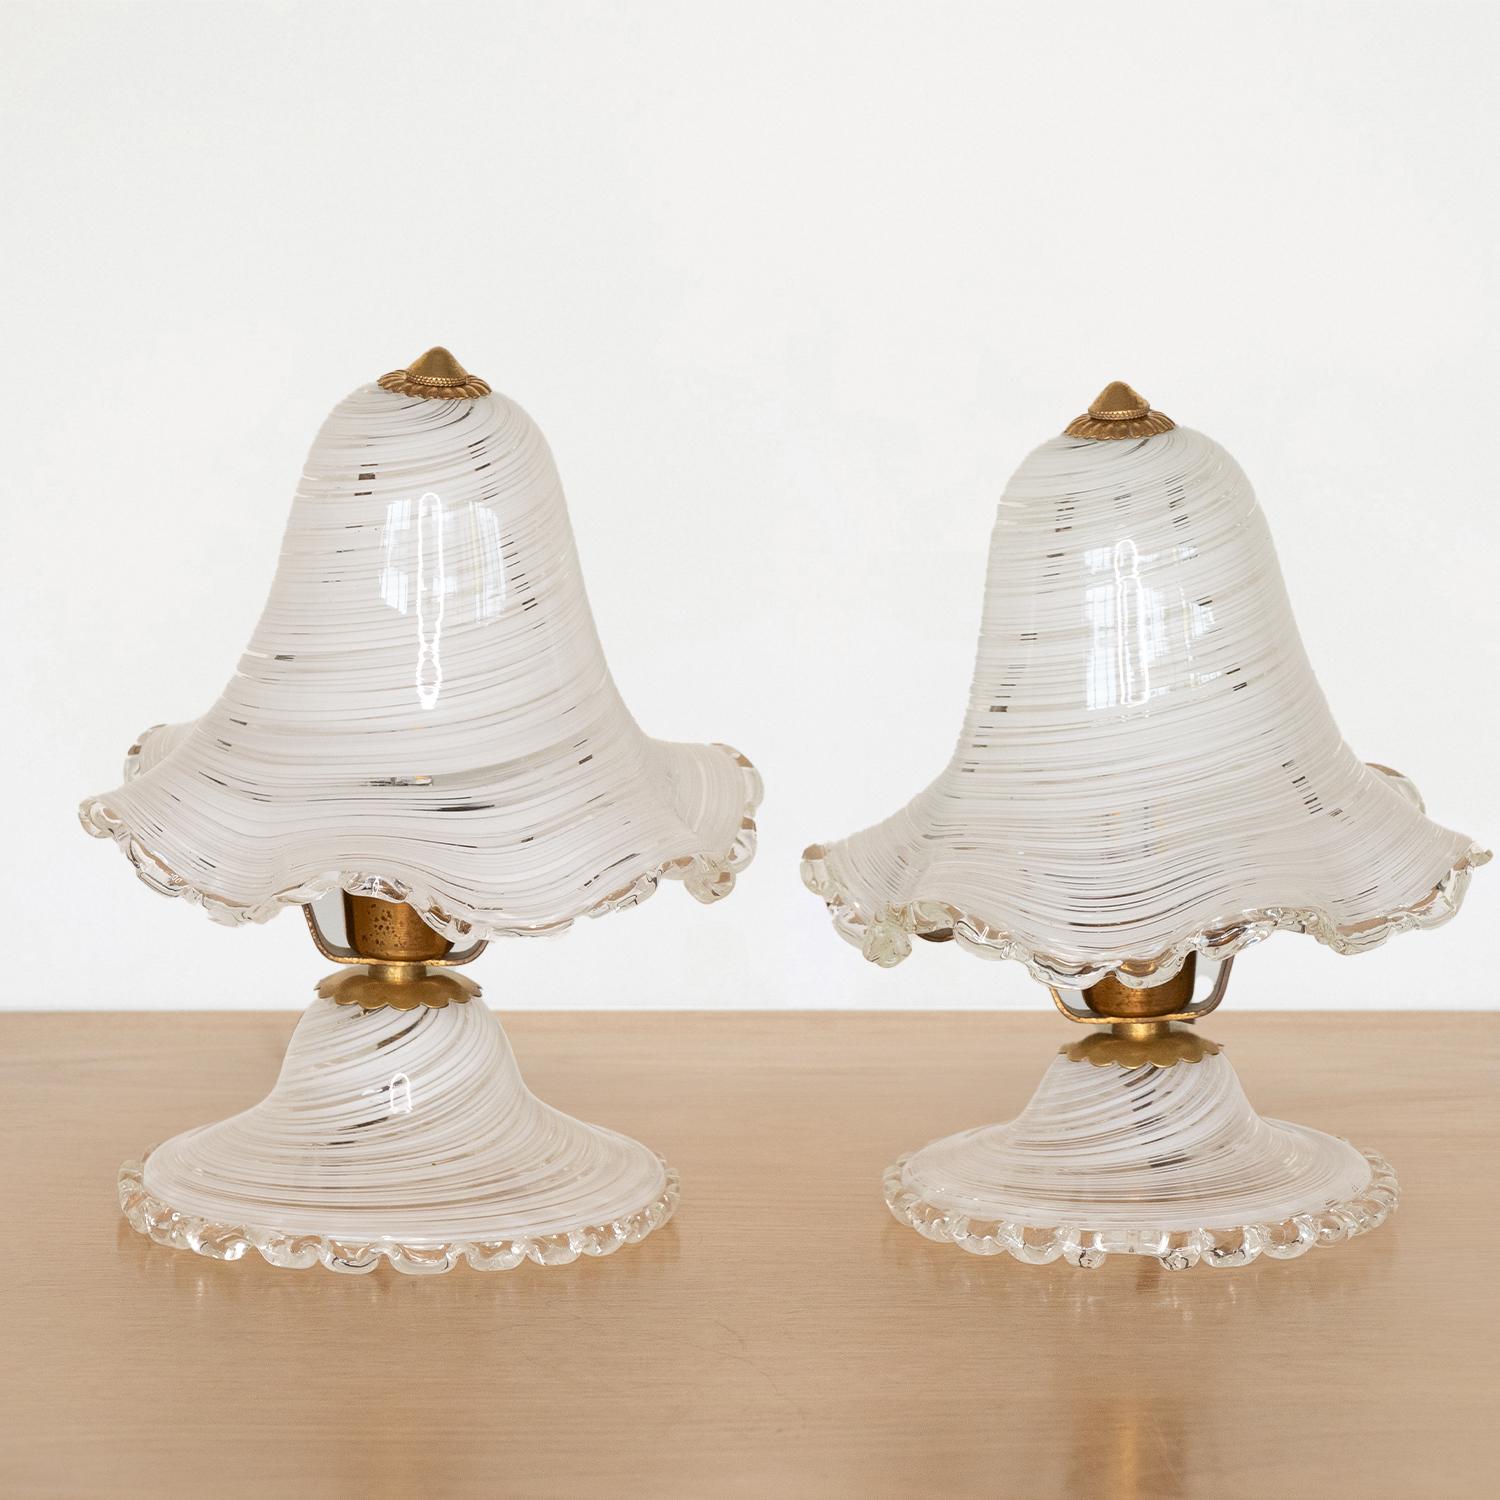 Stunning pair of petite Murano glass lamps from Italy, 1940s. Beautiful swirled white glass bell shade with scalloped rim, scalloped glass base and brass detailing. Newly rewired with brown cloth twist cord. Beautiful age and patina to the brass.